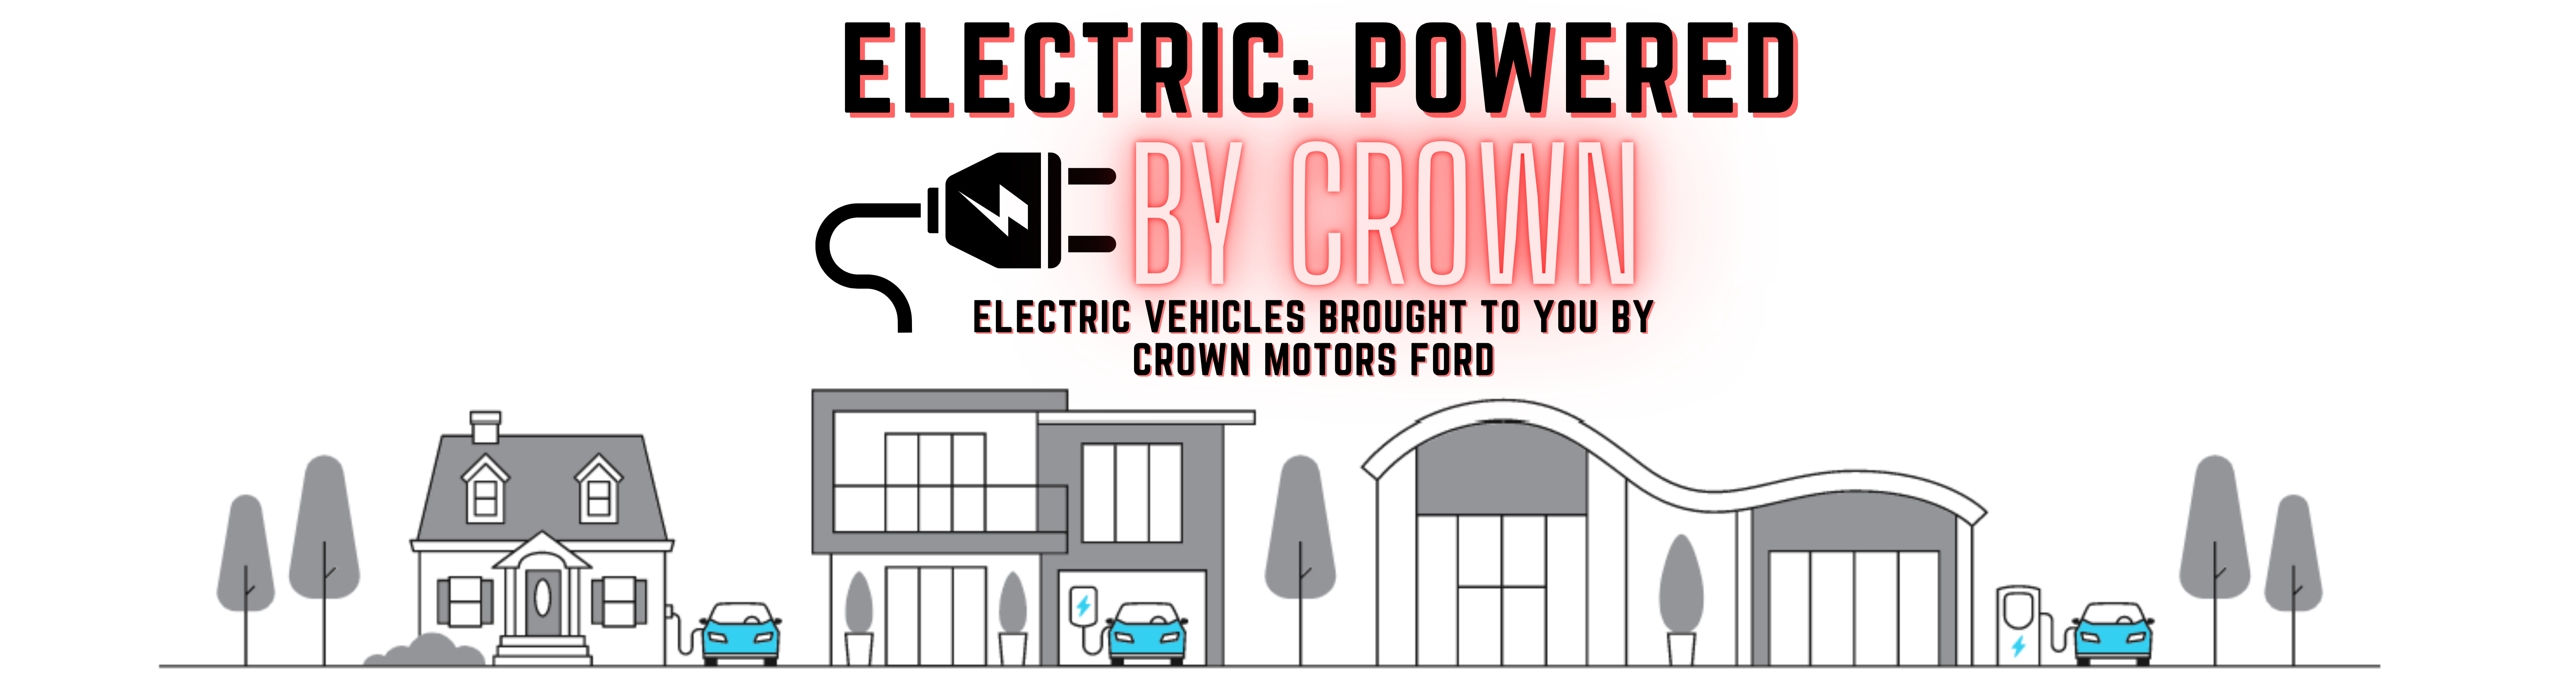 Electric Powered by Crown; Electric vehicles brought to you by Crown Motors Ford.